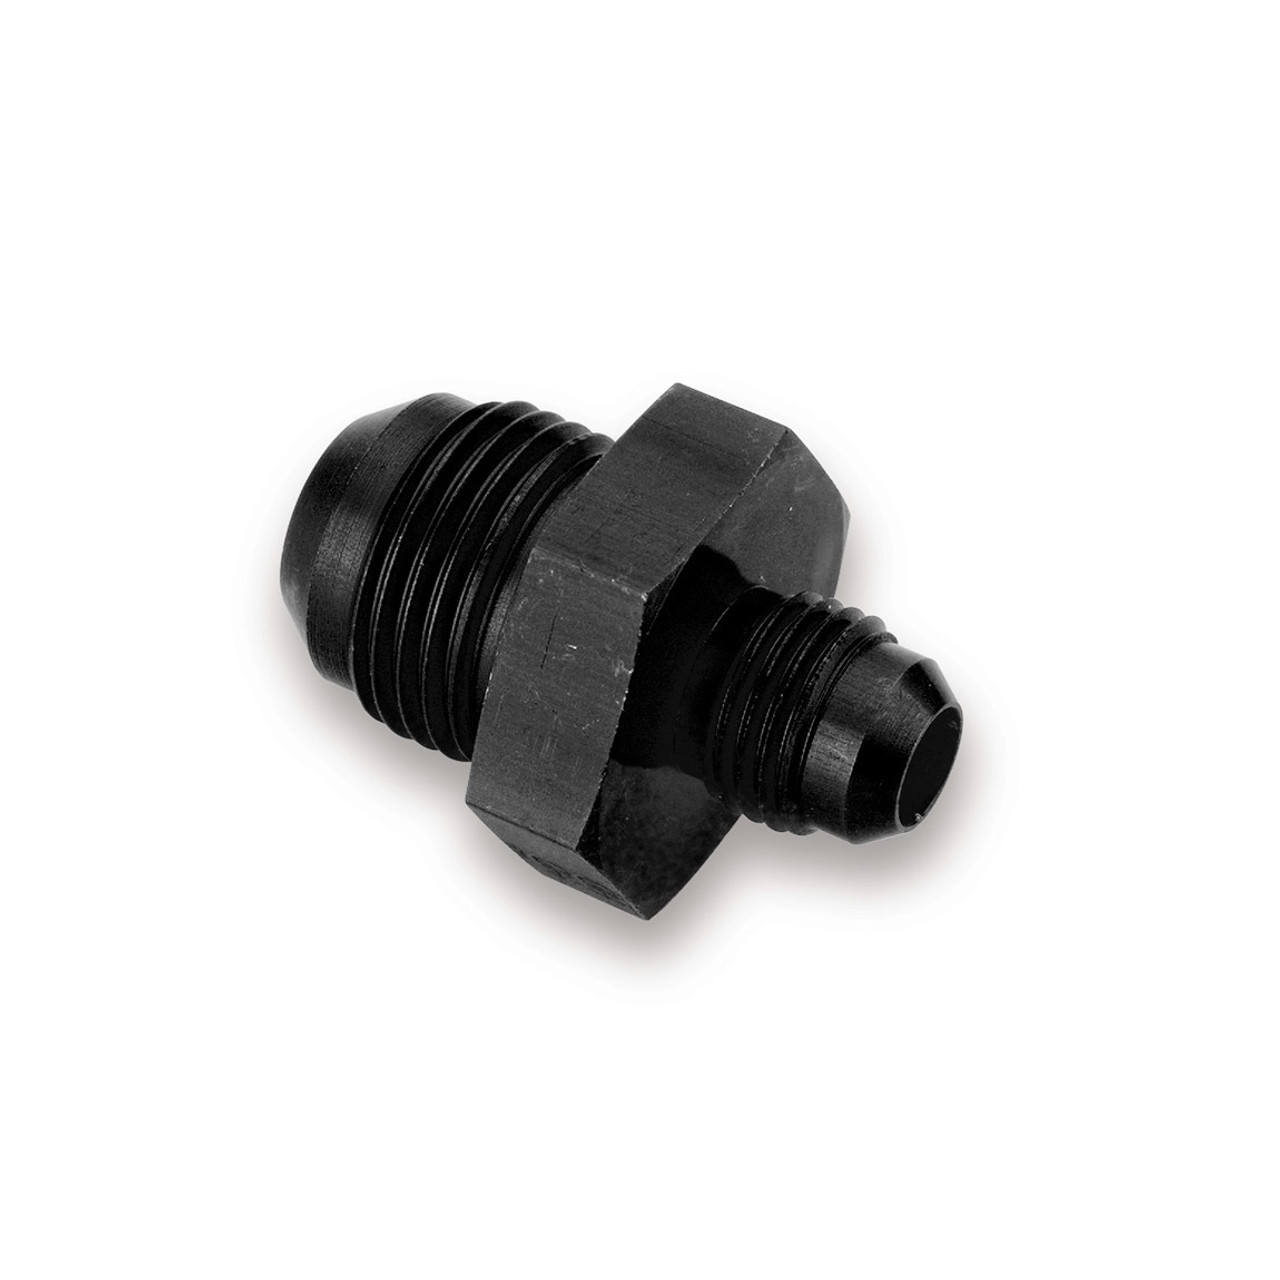 Earls Adapter Fitting Union Reducer 6an to 5an